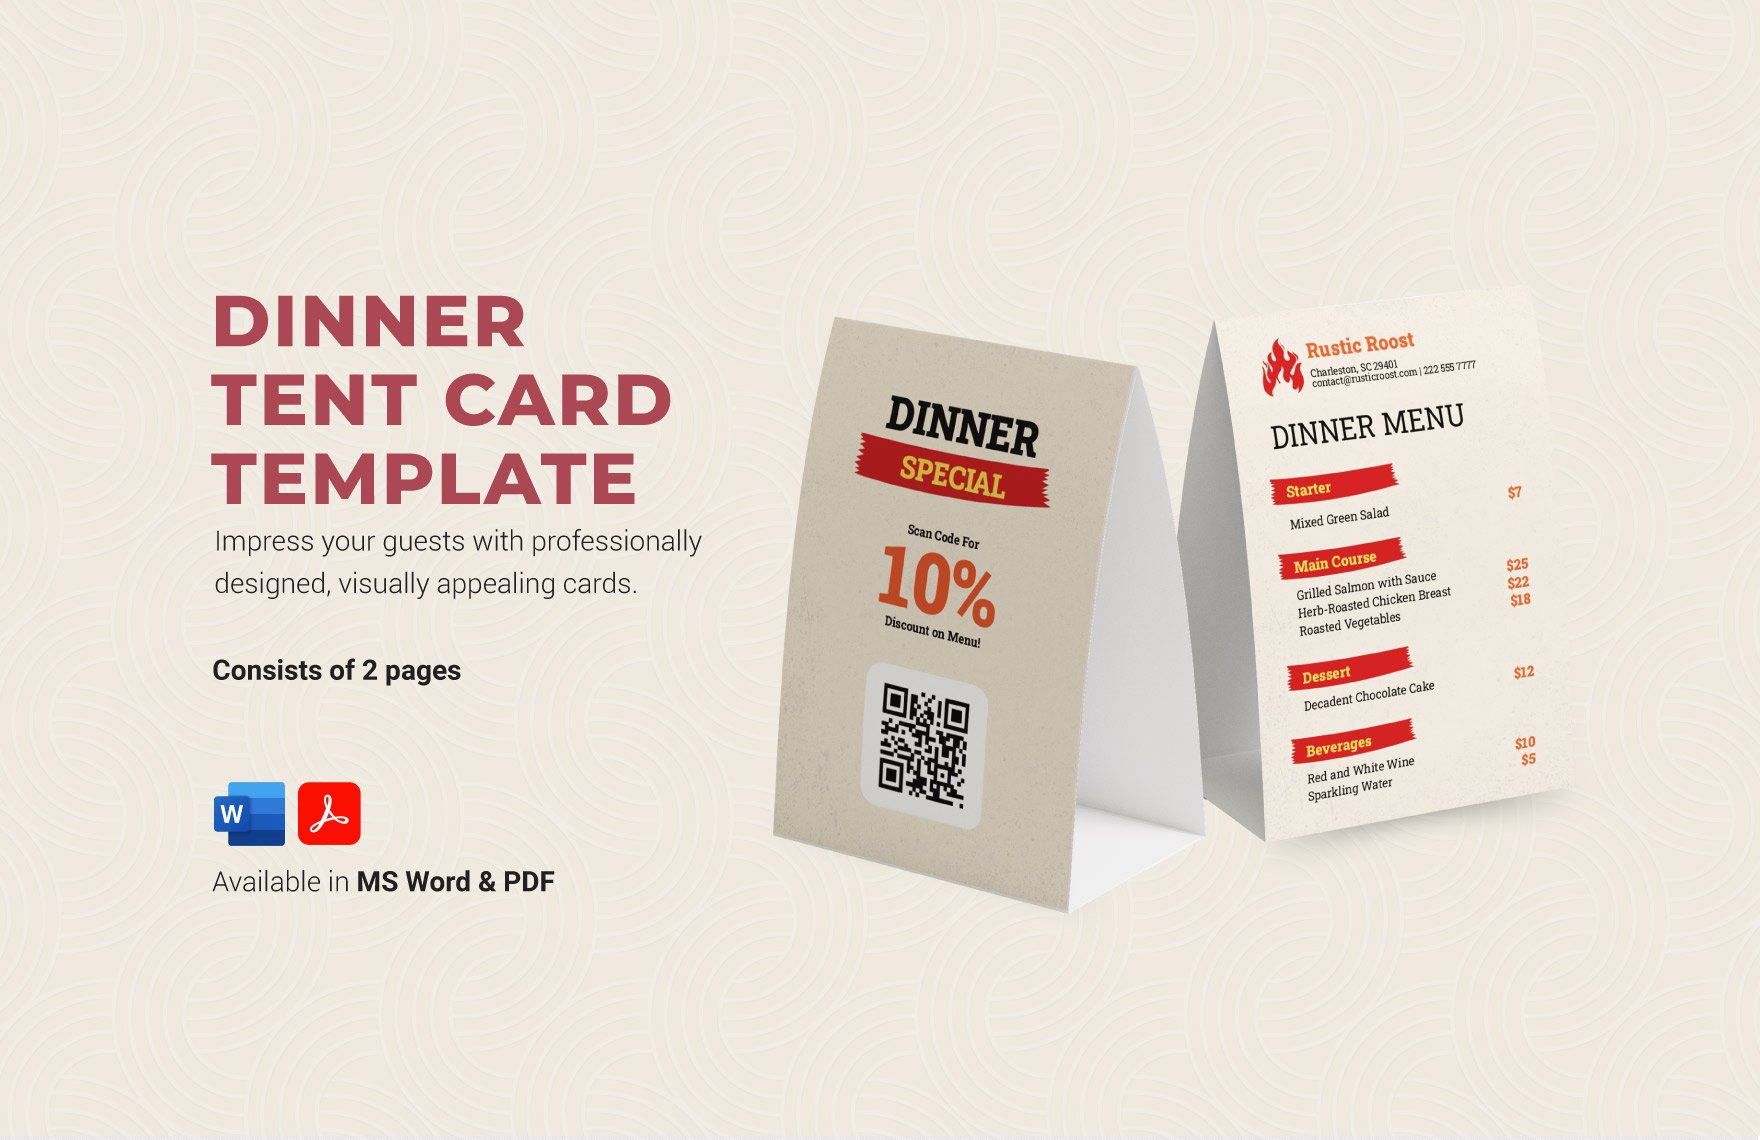 Free Dinner Tent Card Template in Word, PDF